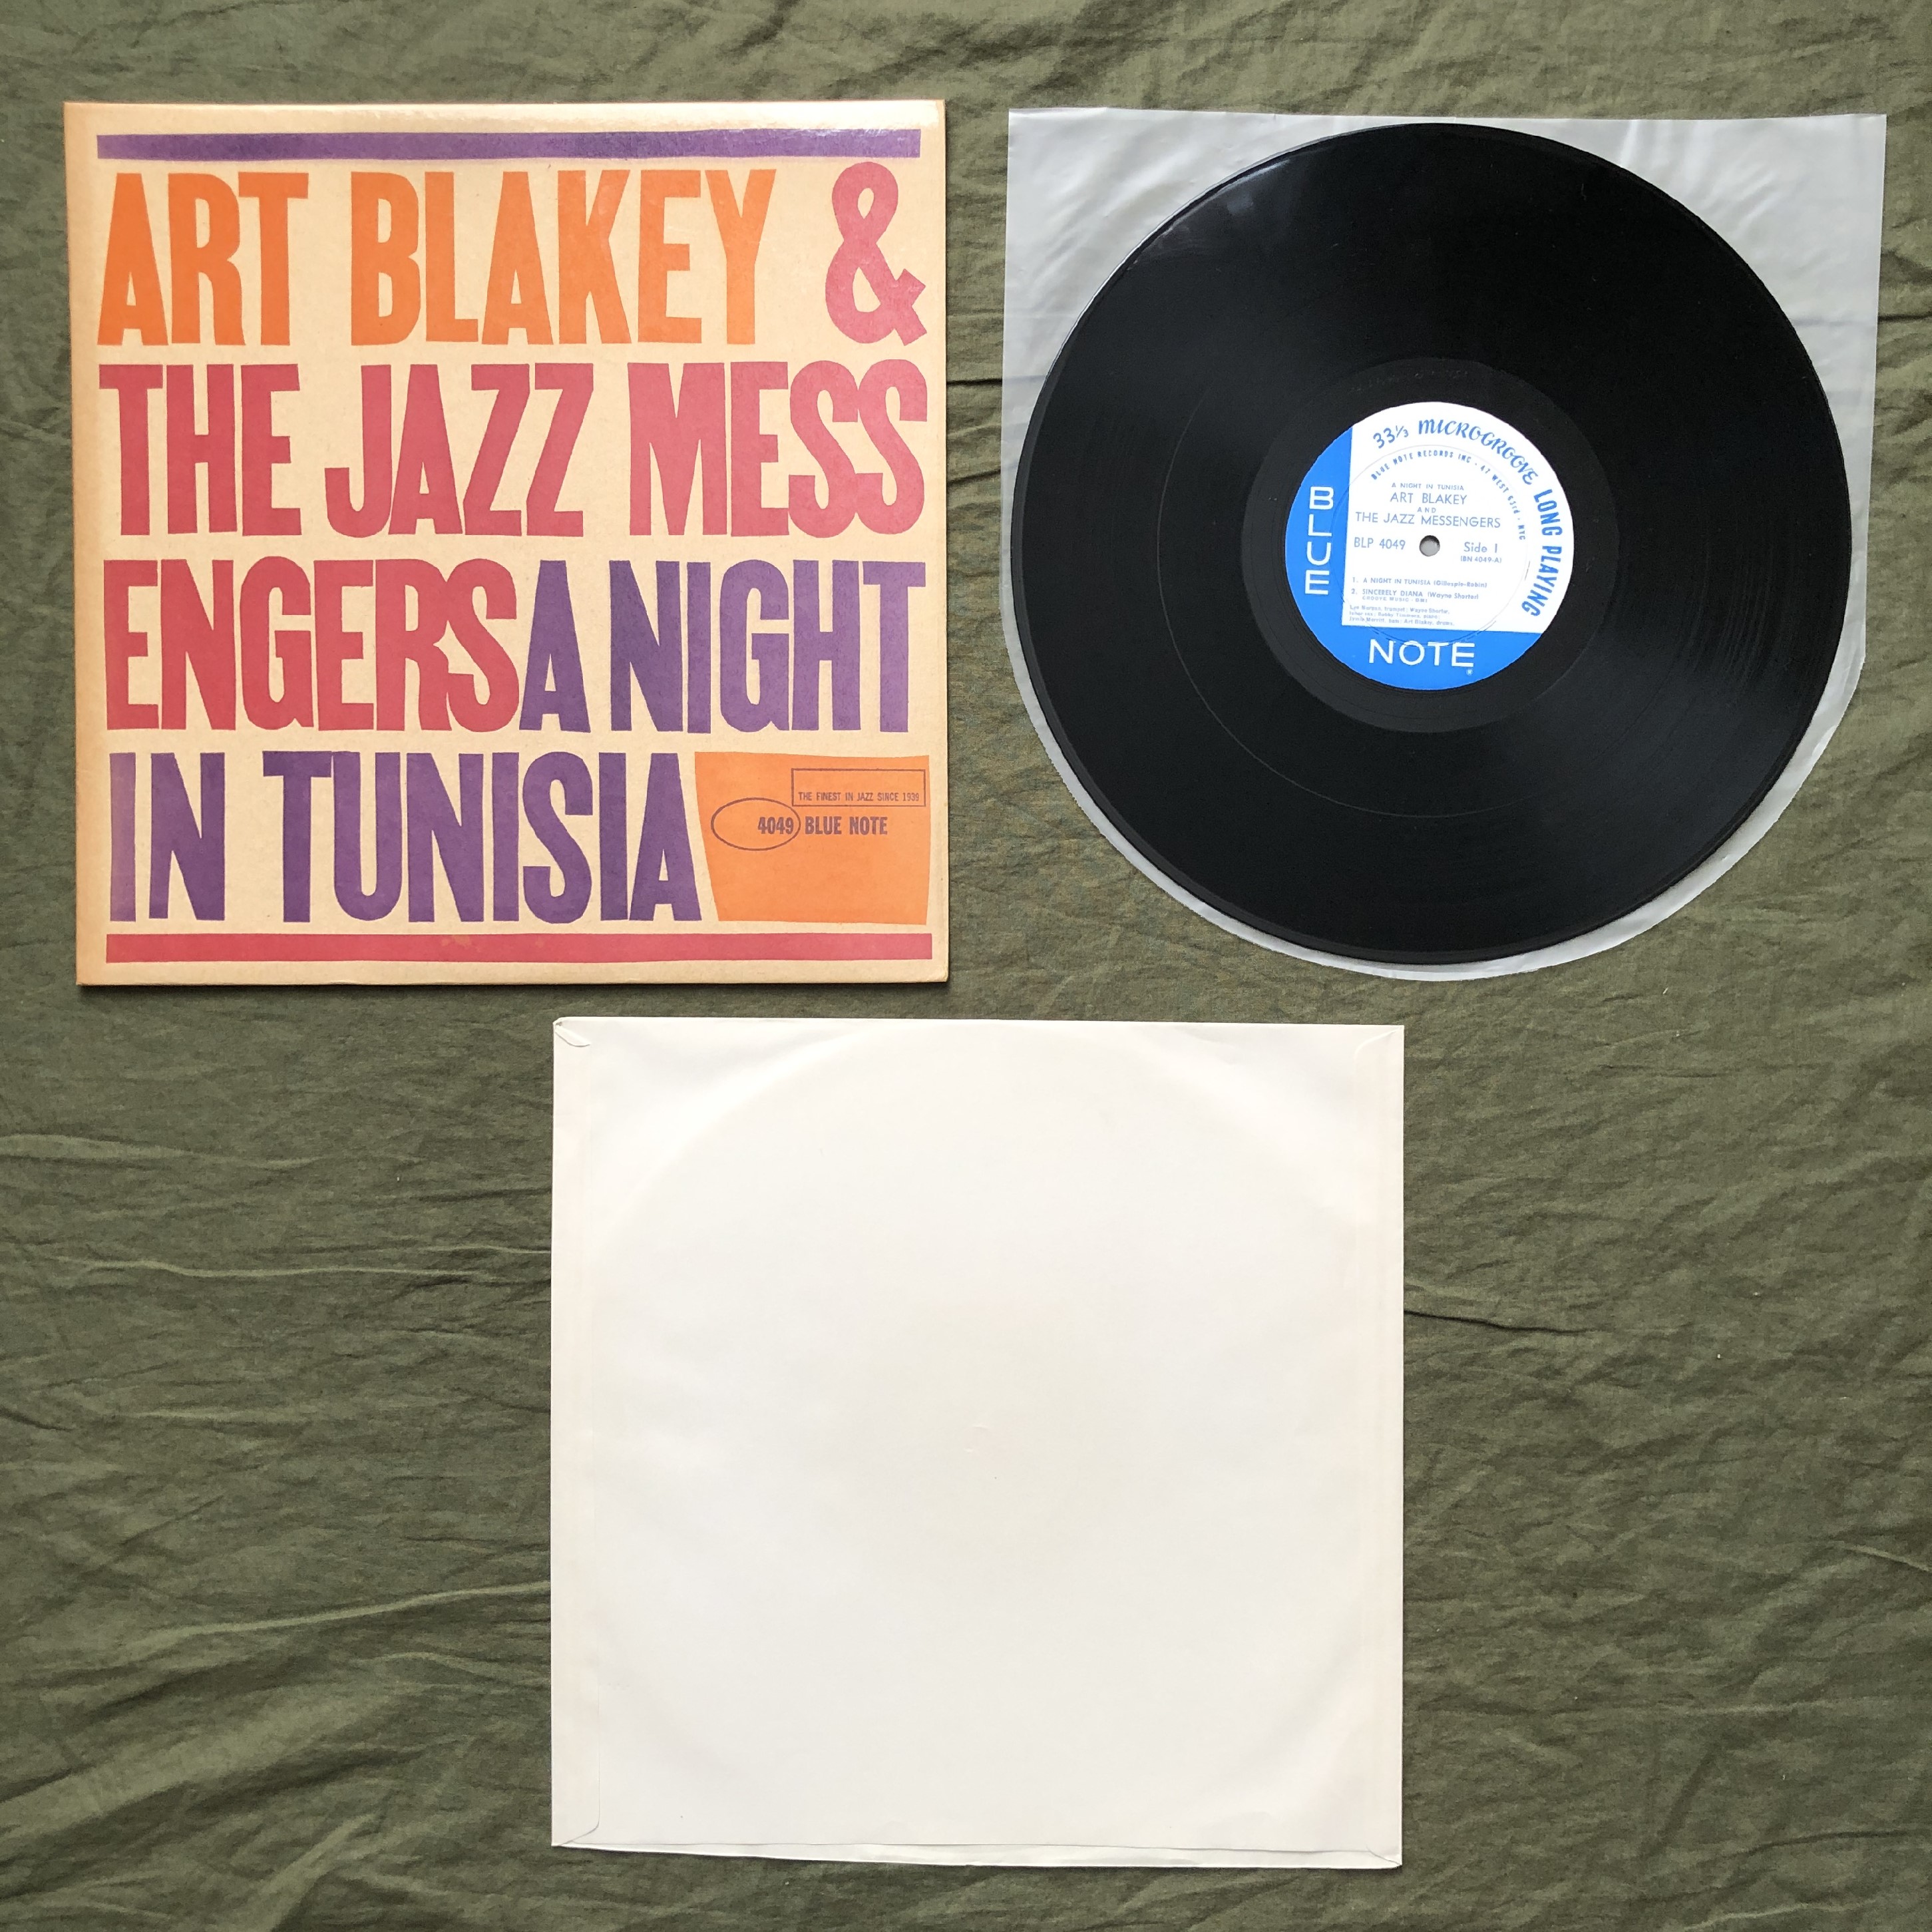 . confidence Hara Collection beautiful record 1961 year RVG stamp American book@ country original Release record Art Blakey LP record A Night In Tunisia: Wayne Shorter